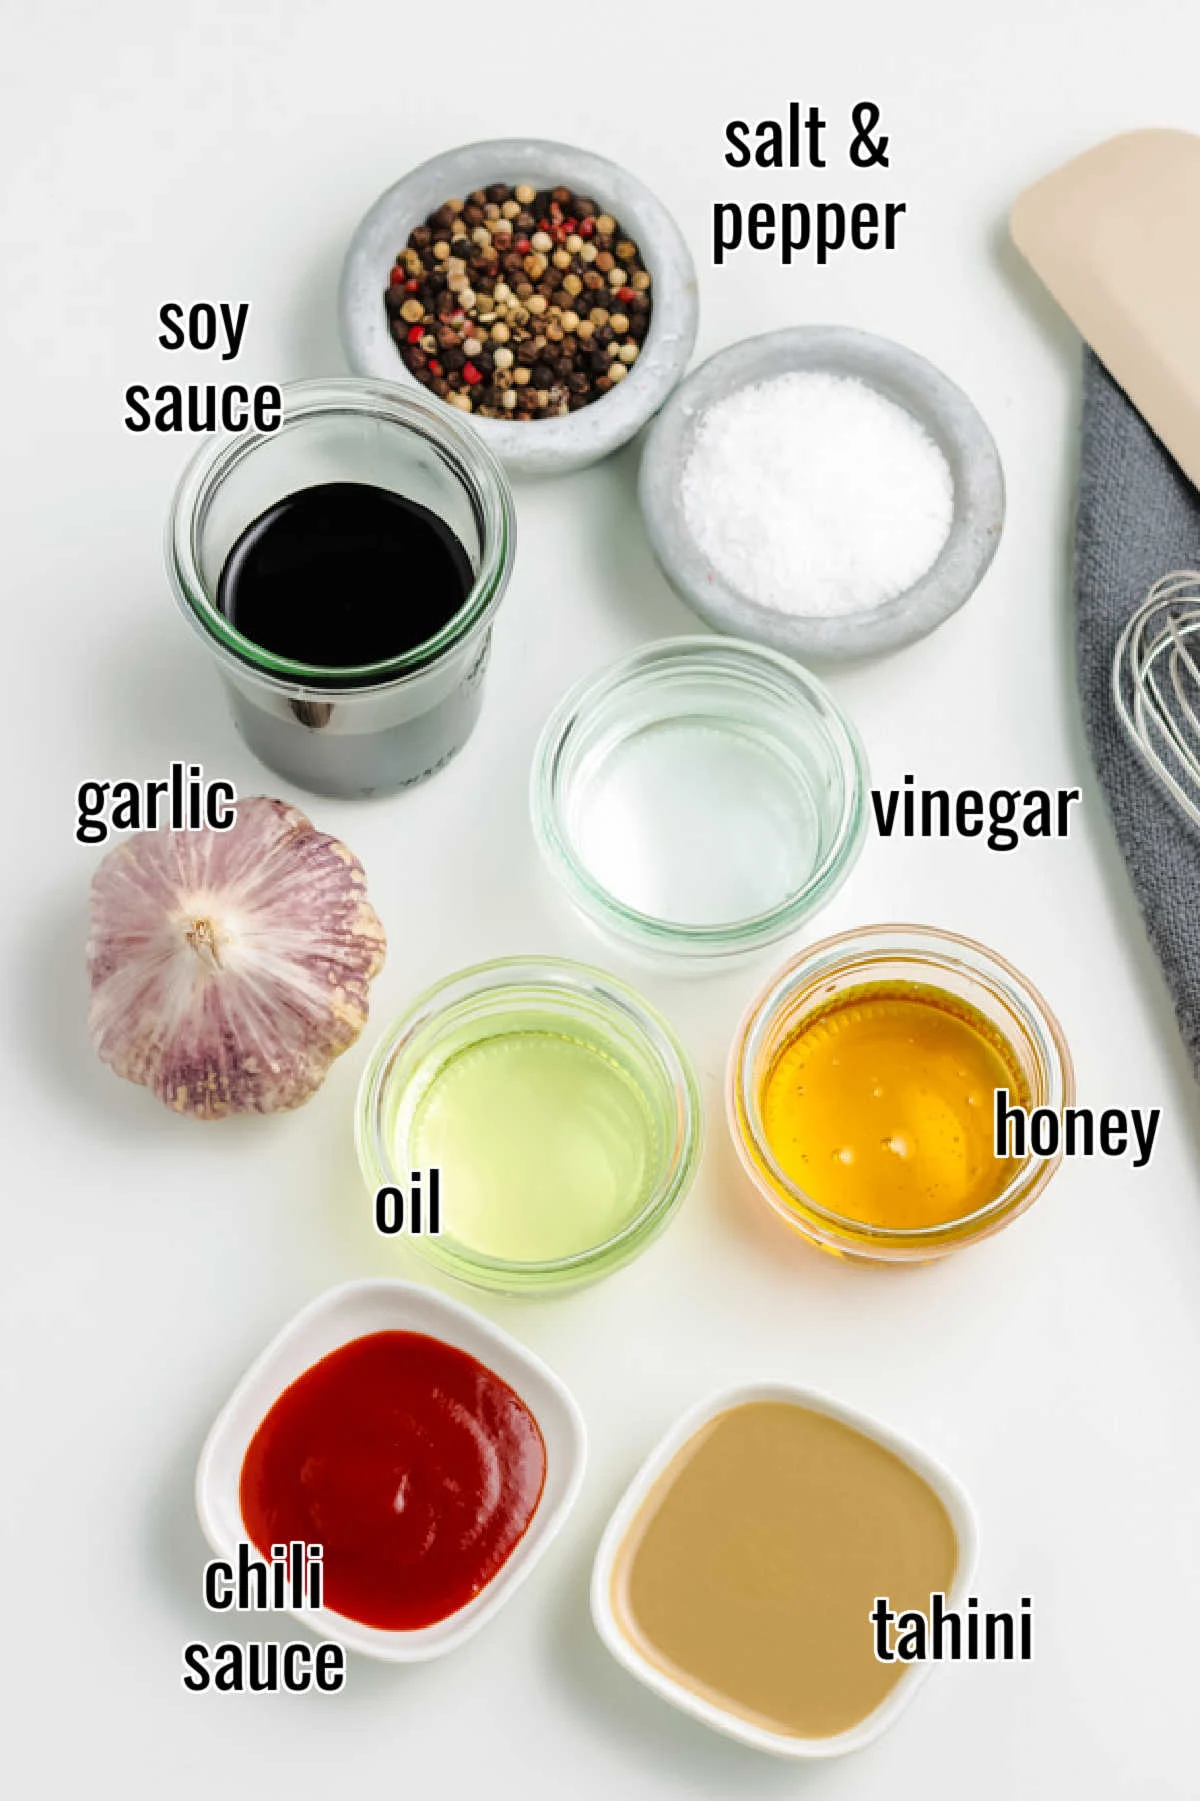 common ingredients that are used in this homemade version of commercial hoisin sauce.